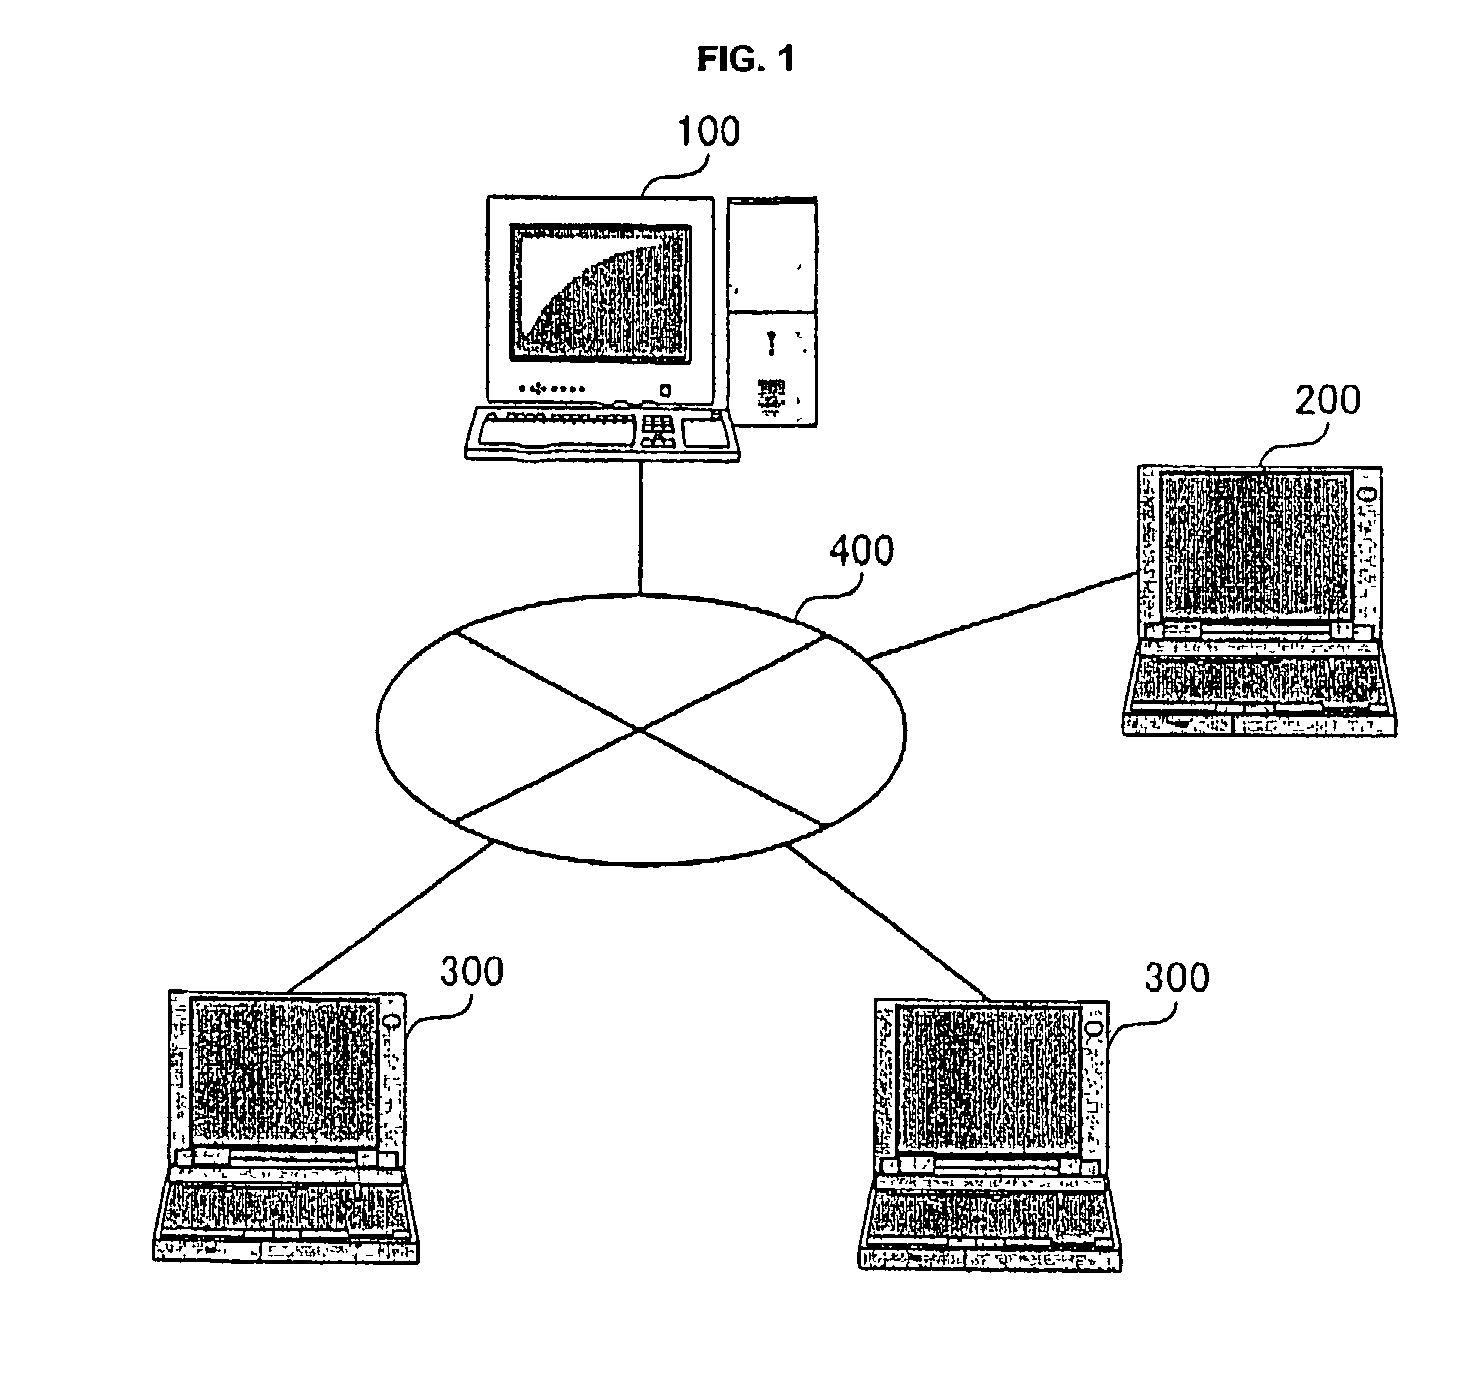 System, method and apparatus for updating electronic mail recipient lists